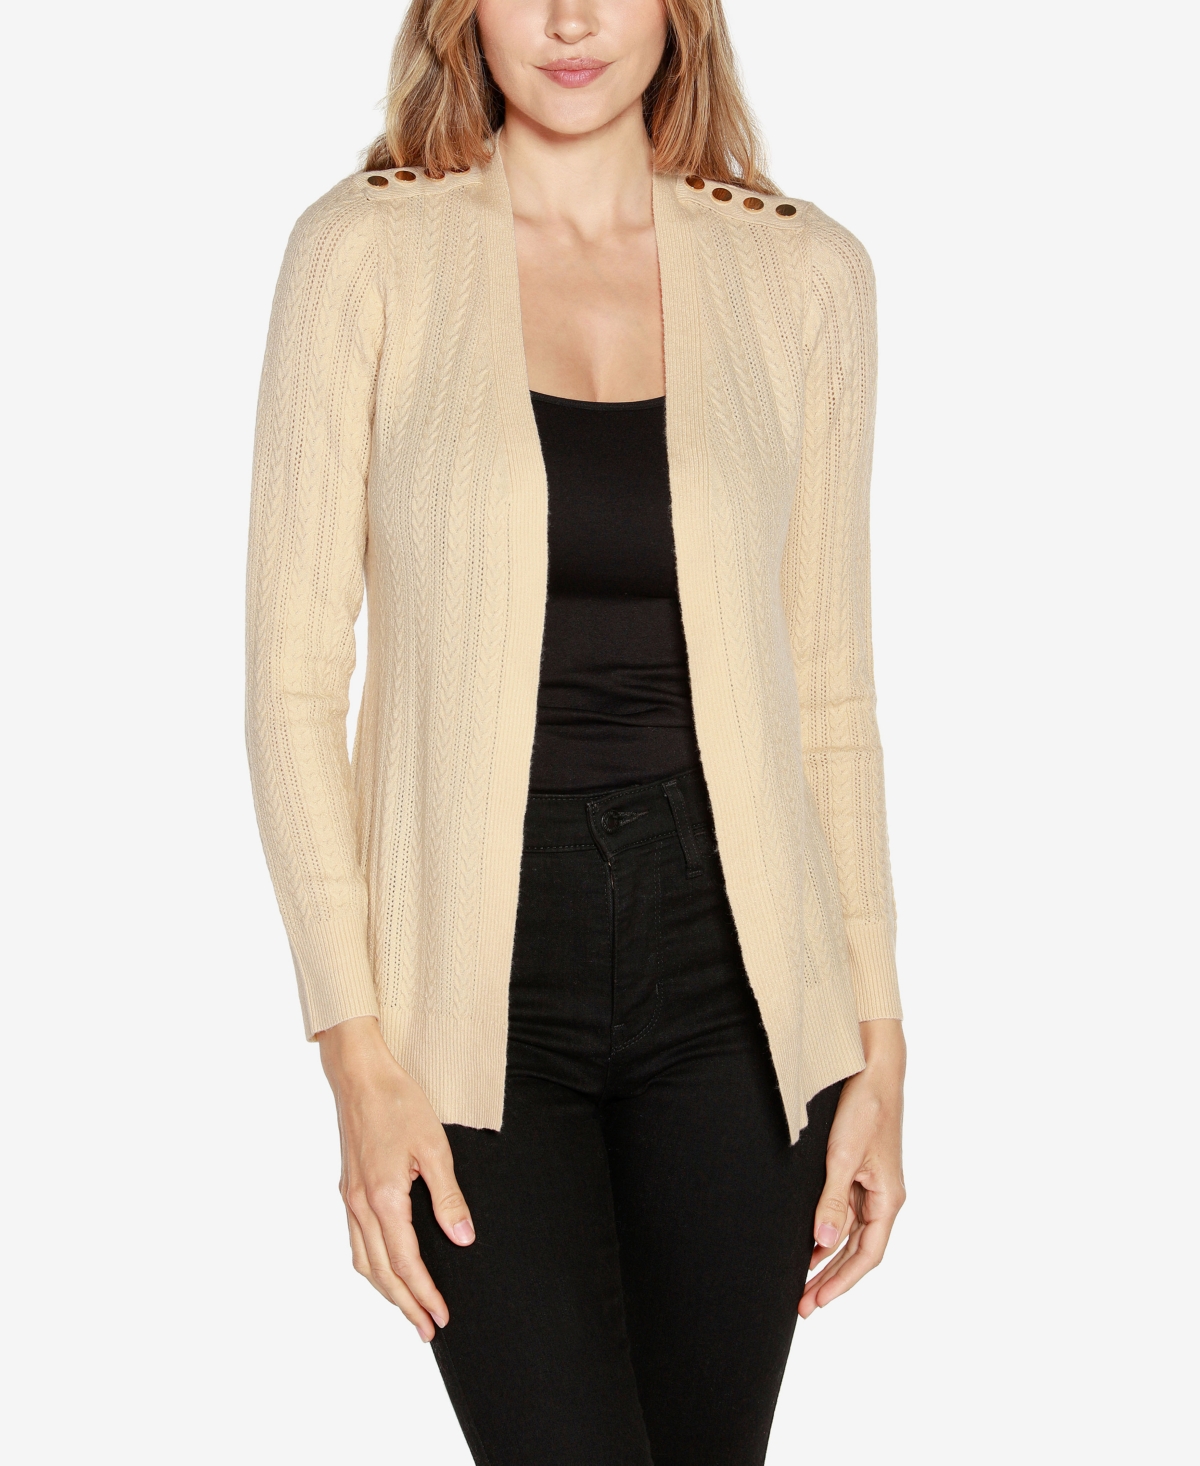 Belldini Black Label Women's Open Front Cable Knit Cardigan Sweater In Cream